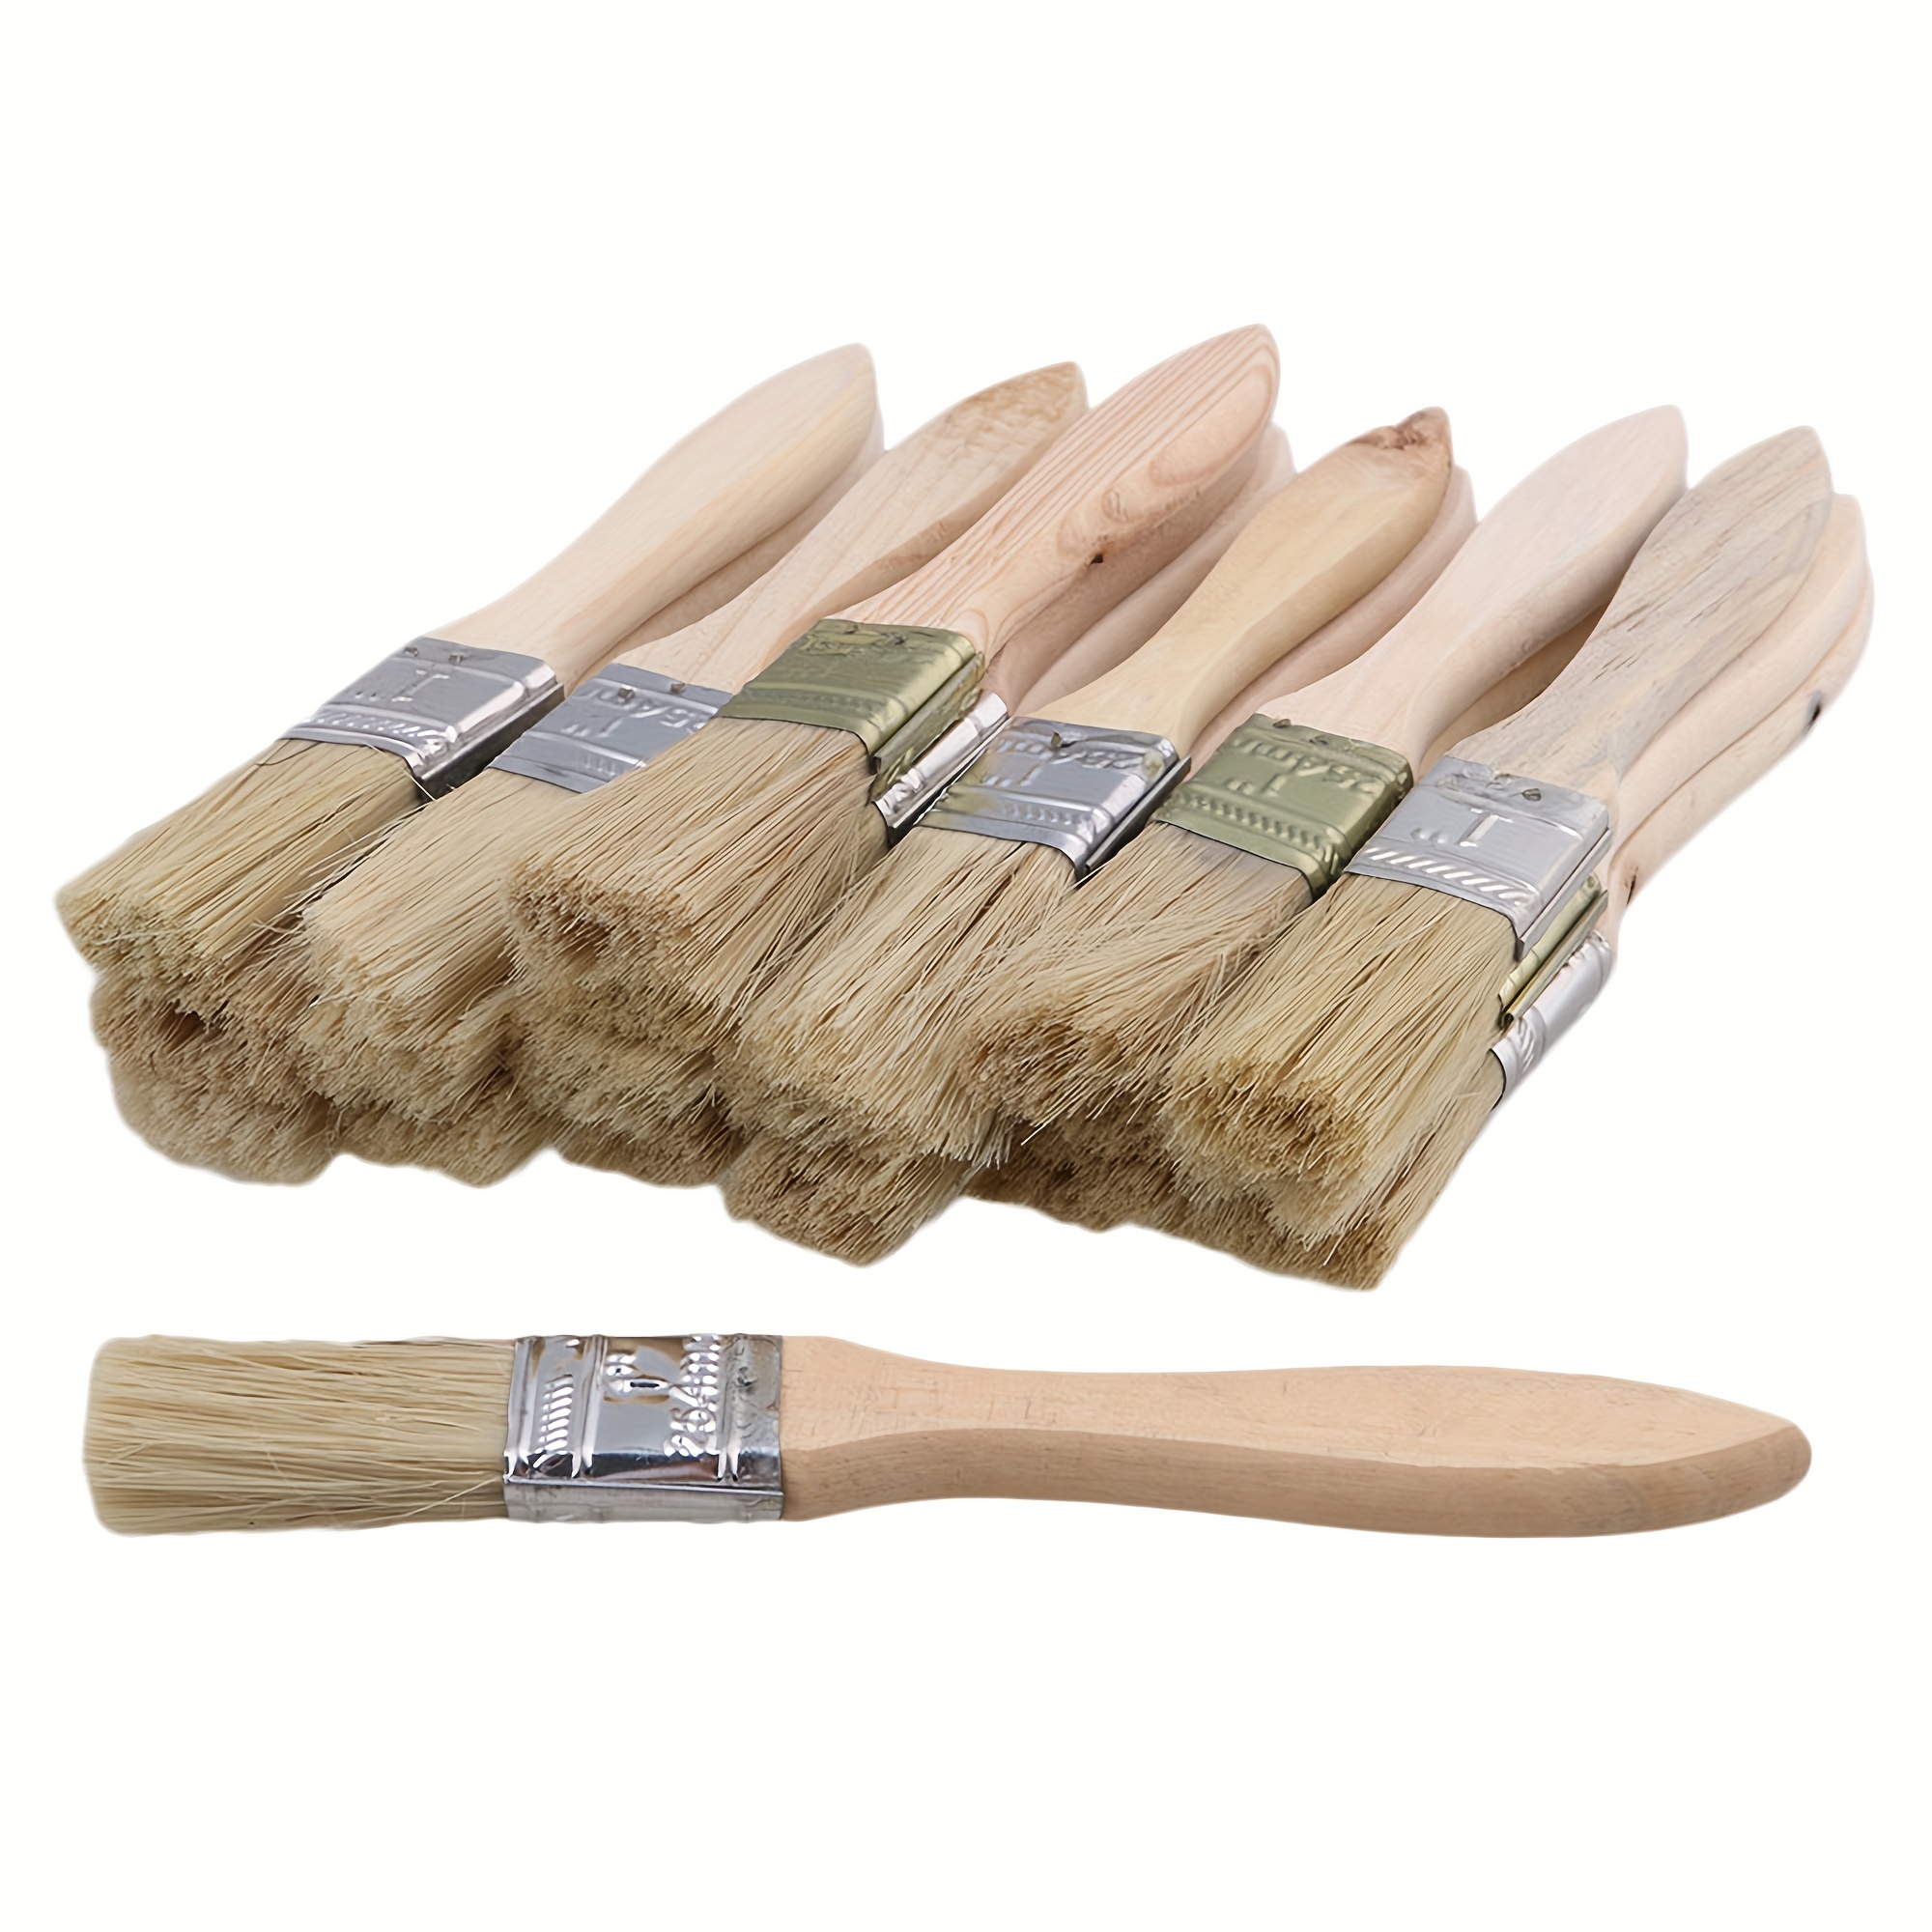 

20pcs Thickened Wooden Handle Paint Brush 1 Inch For School Office And Home